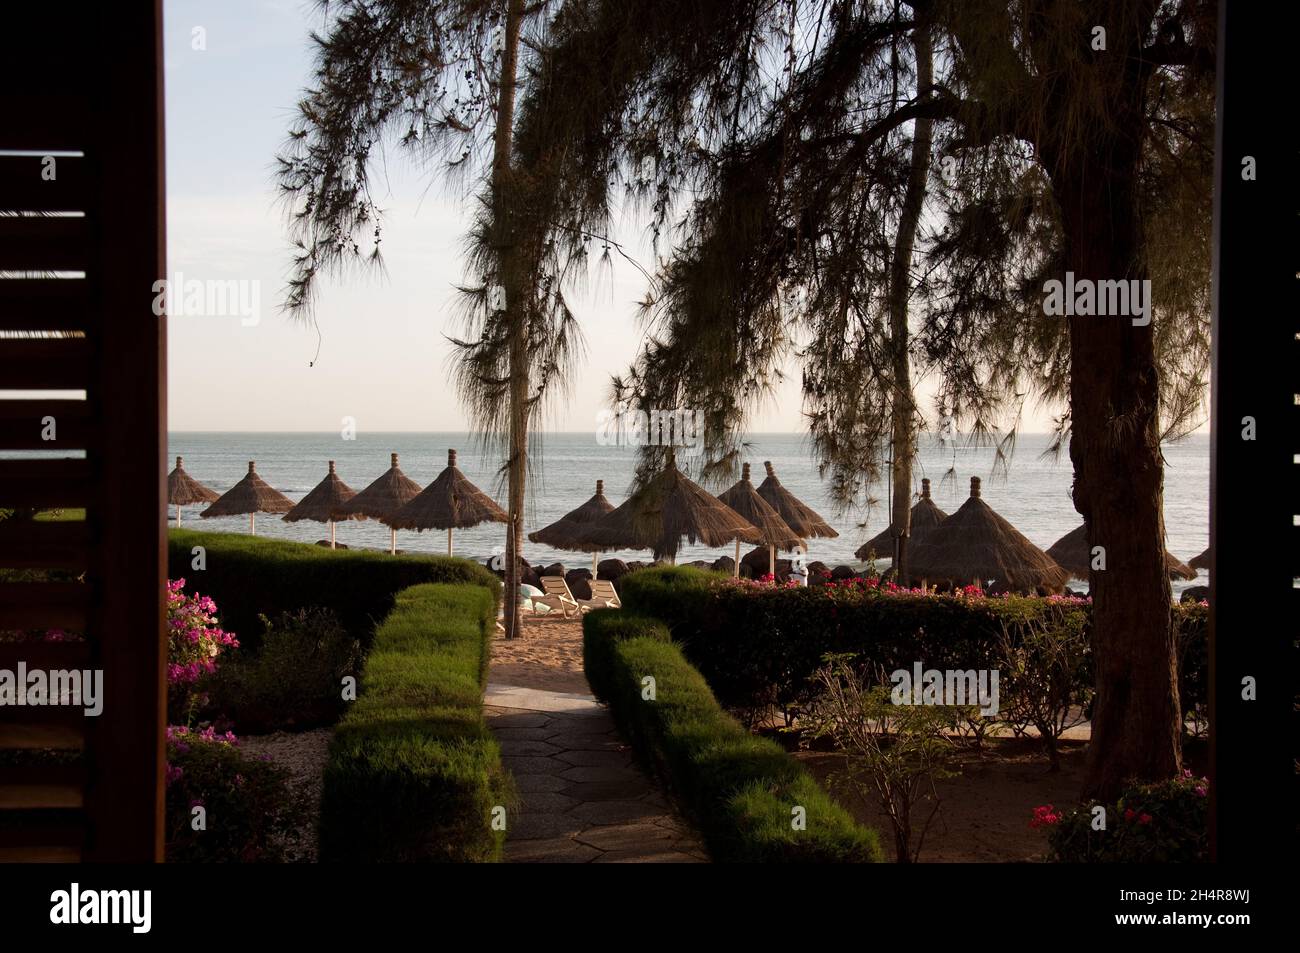 At the beach, Saly-Portudal, Petite Côte of Senegal, Senegal.  Beach, deck-chairs, trees, thatched rooves; beach shade. Stock Photo